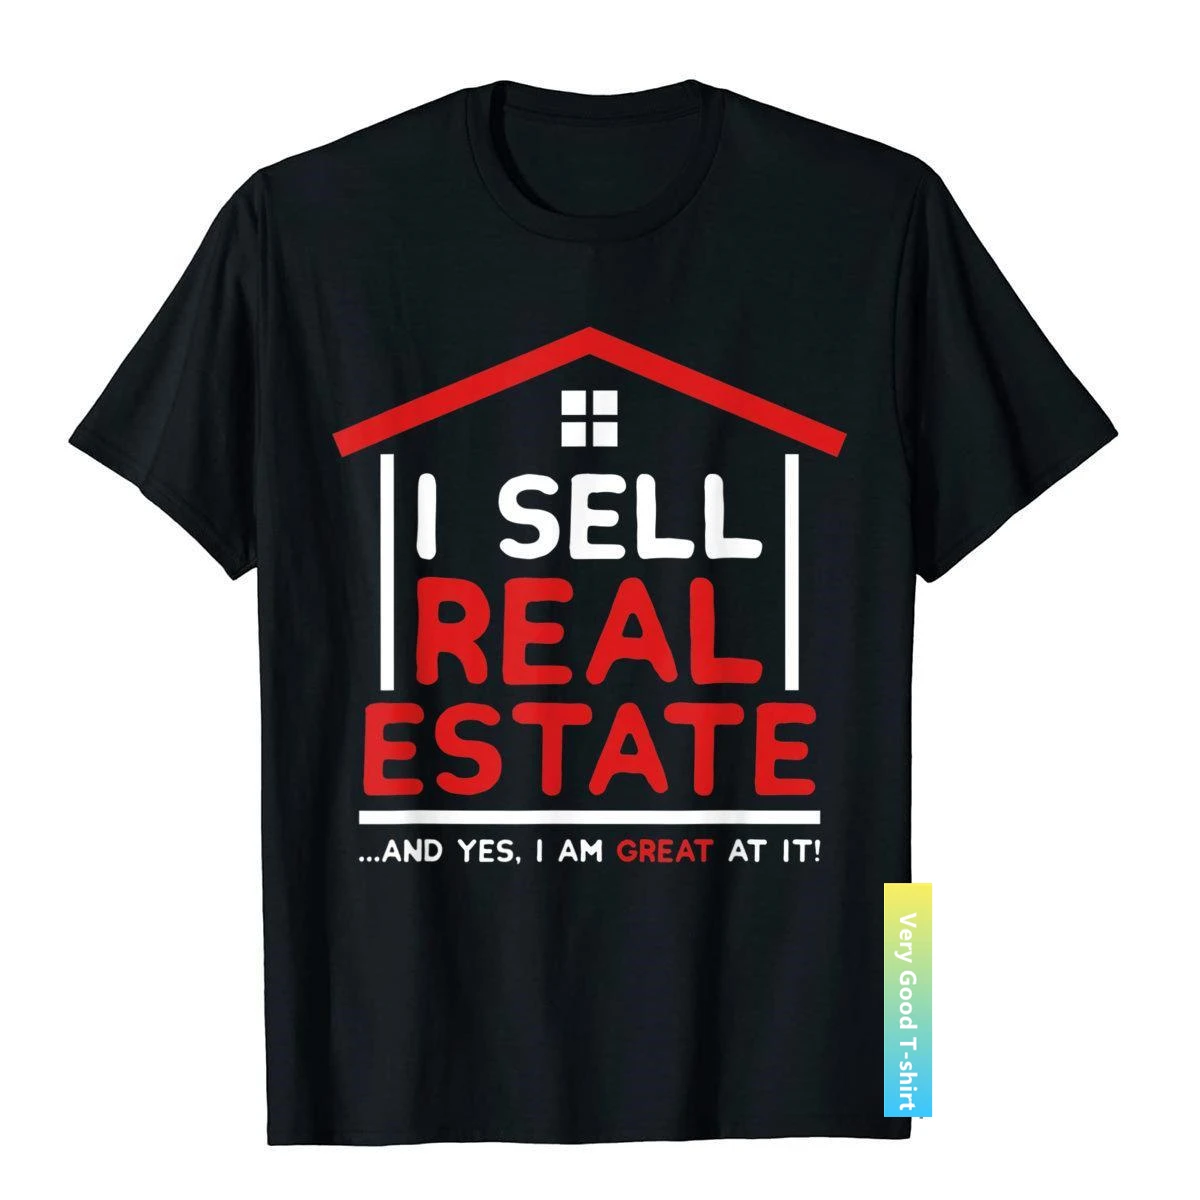 I Sell Real Estate Funny Realtor Quote Agent Broker Investor T-Shirt Tops Shirt Family Crazy Cotton Men T Shirt Family